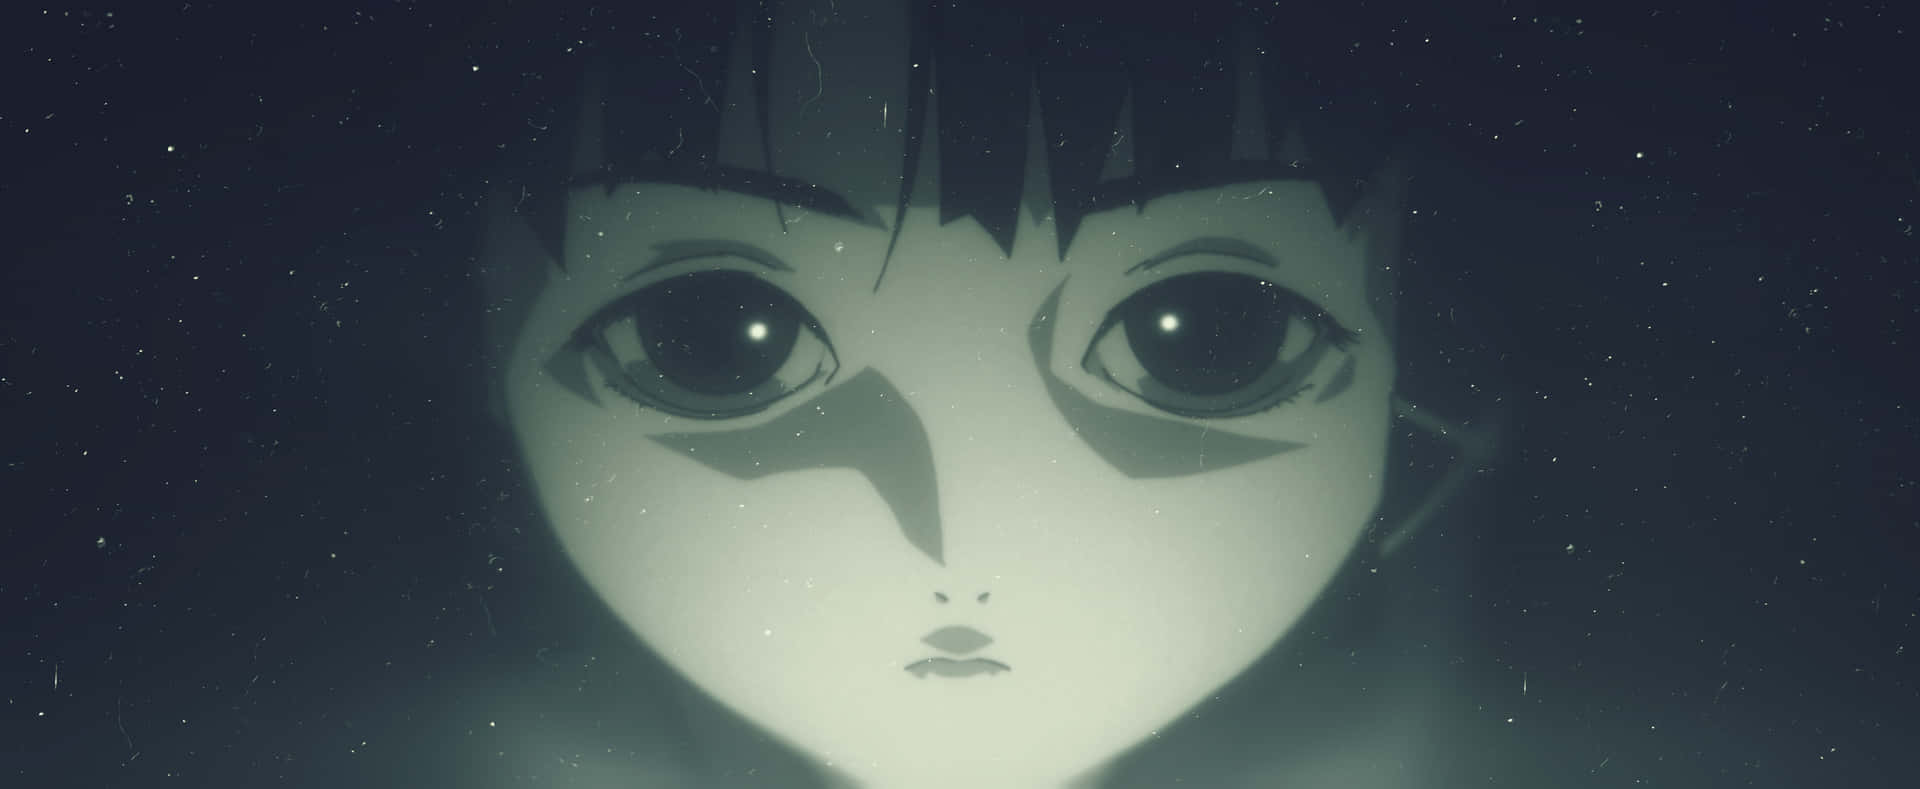 Explore The Digital World With Serial Experiments Lain Background